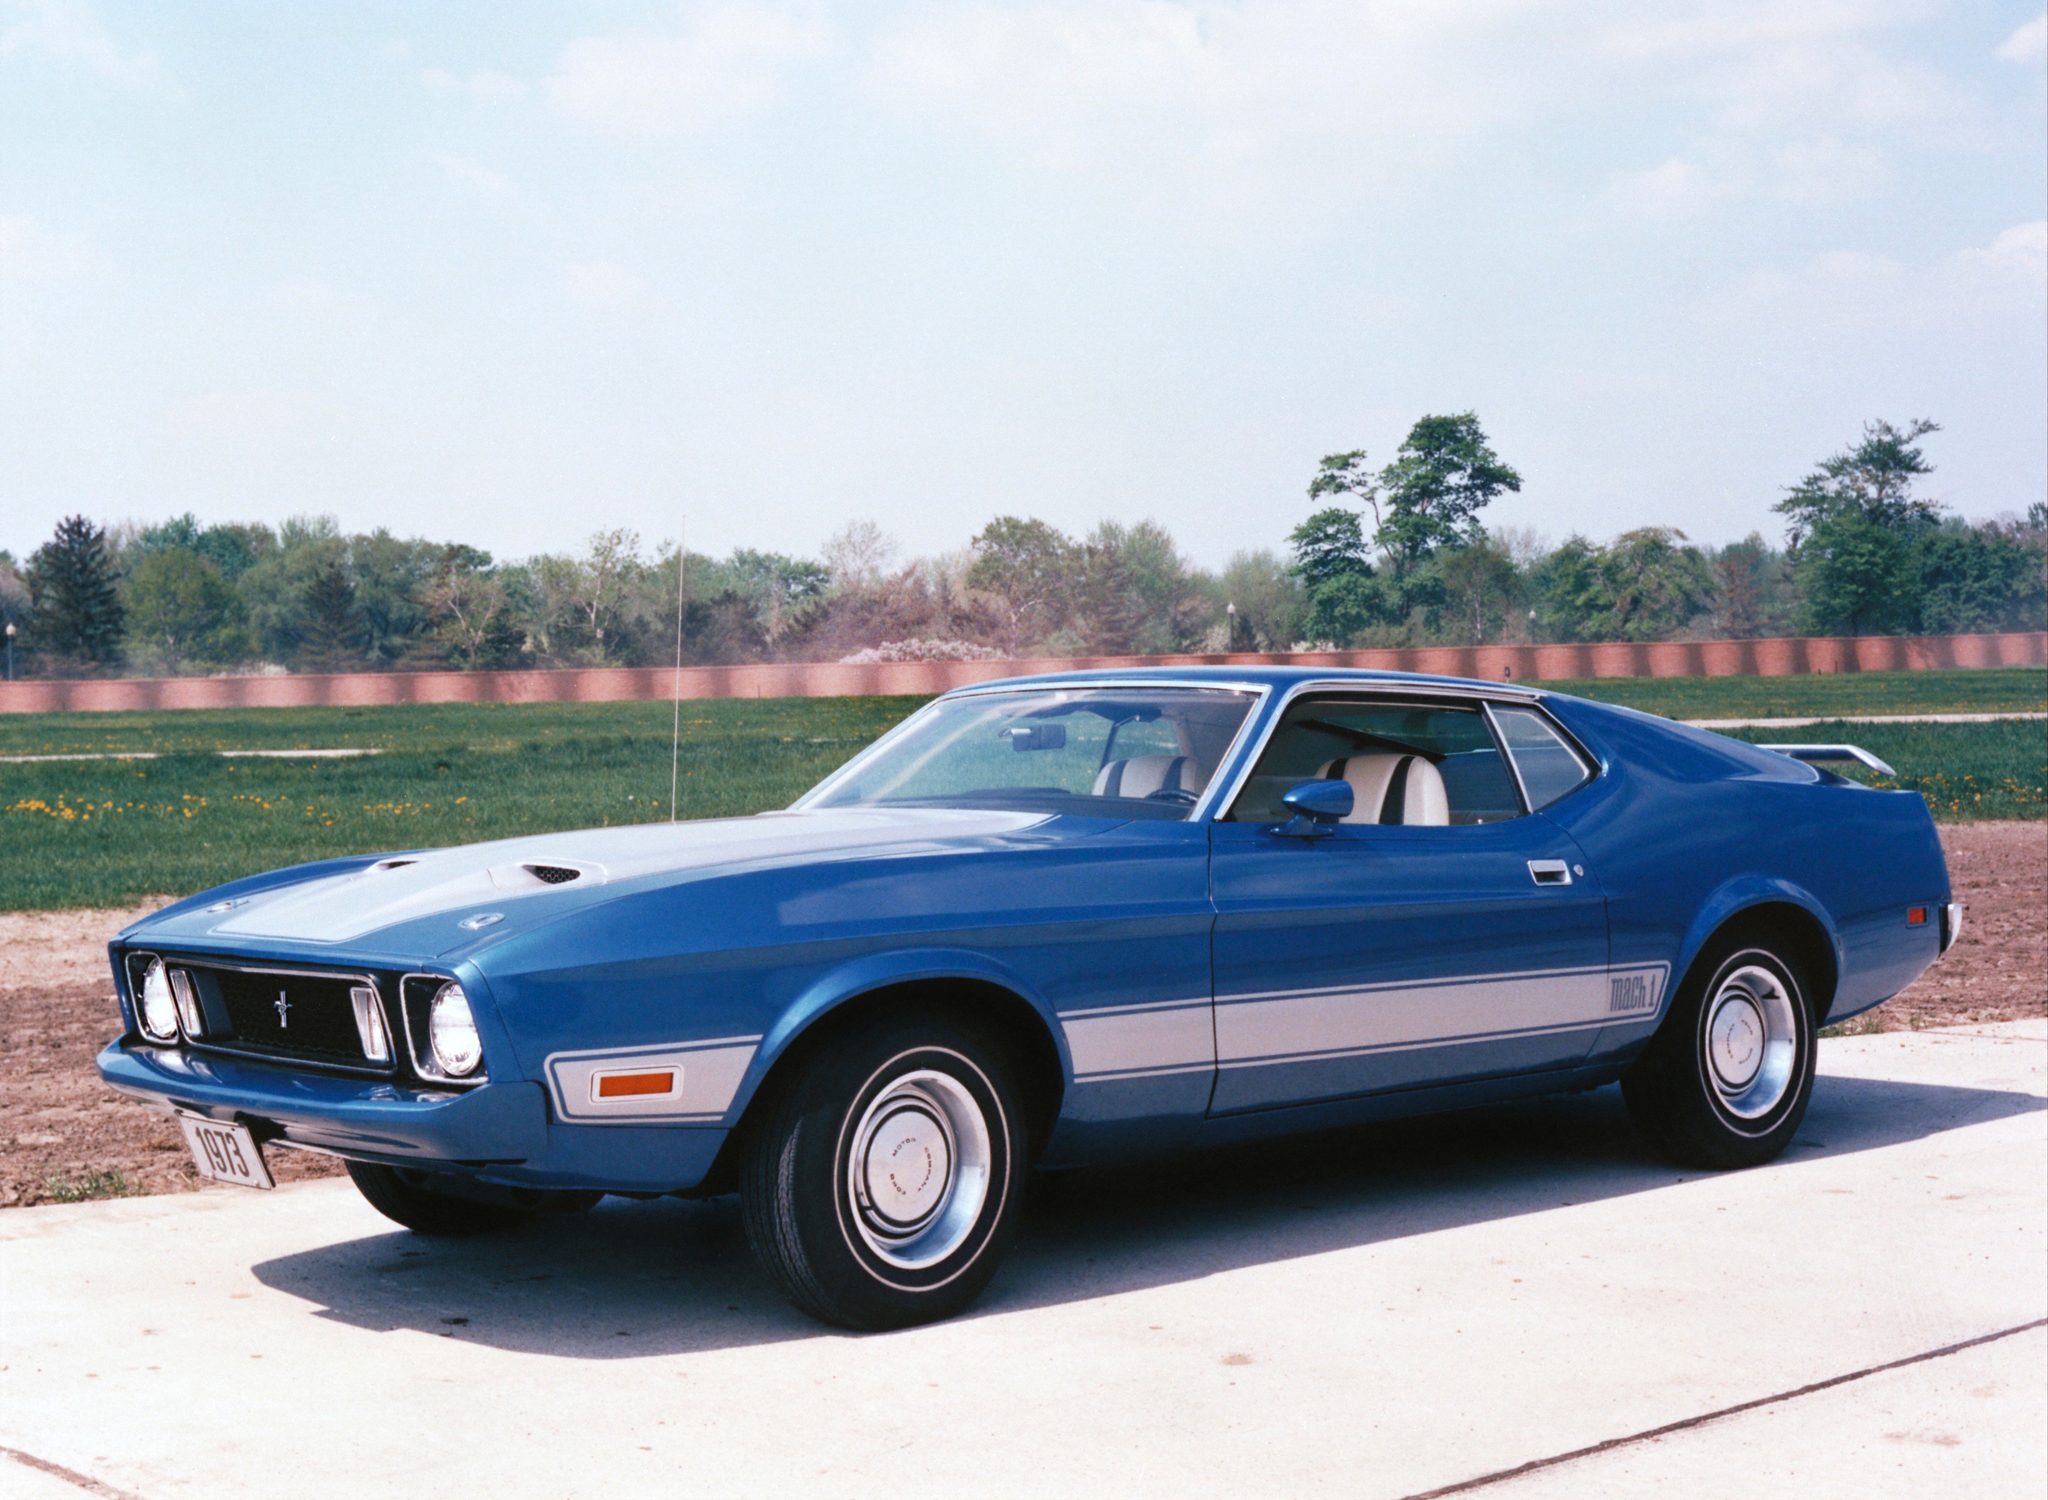 Mustang Of The Day: 1973 Ford Mustang Mach 1